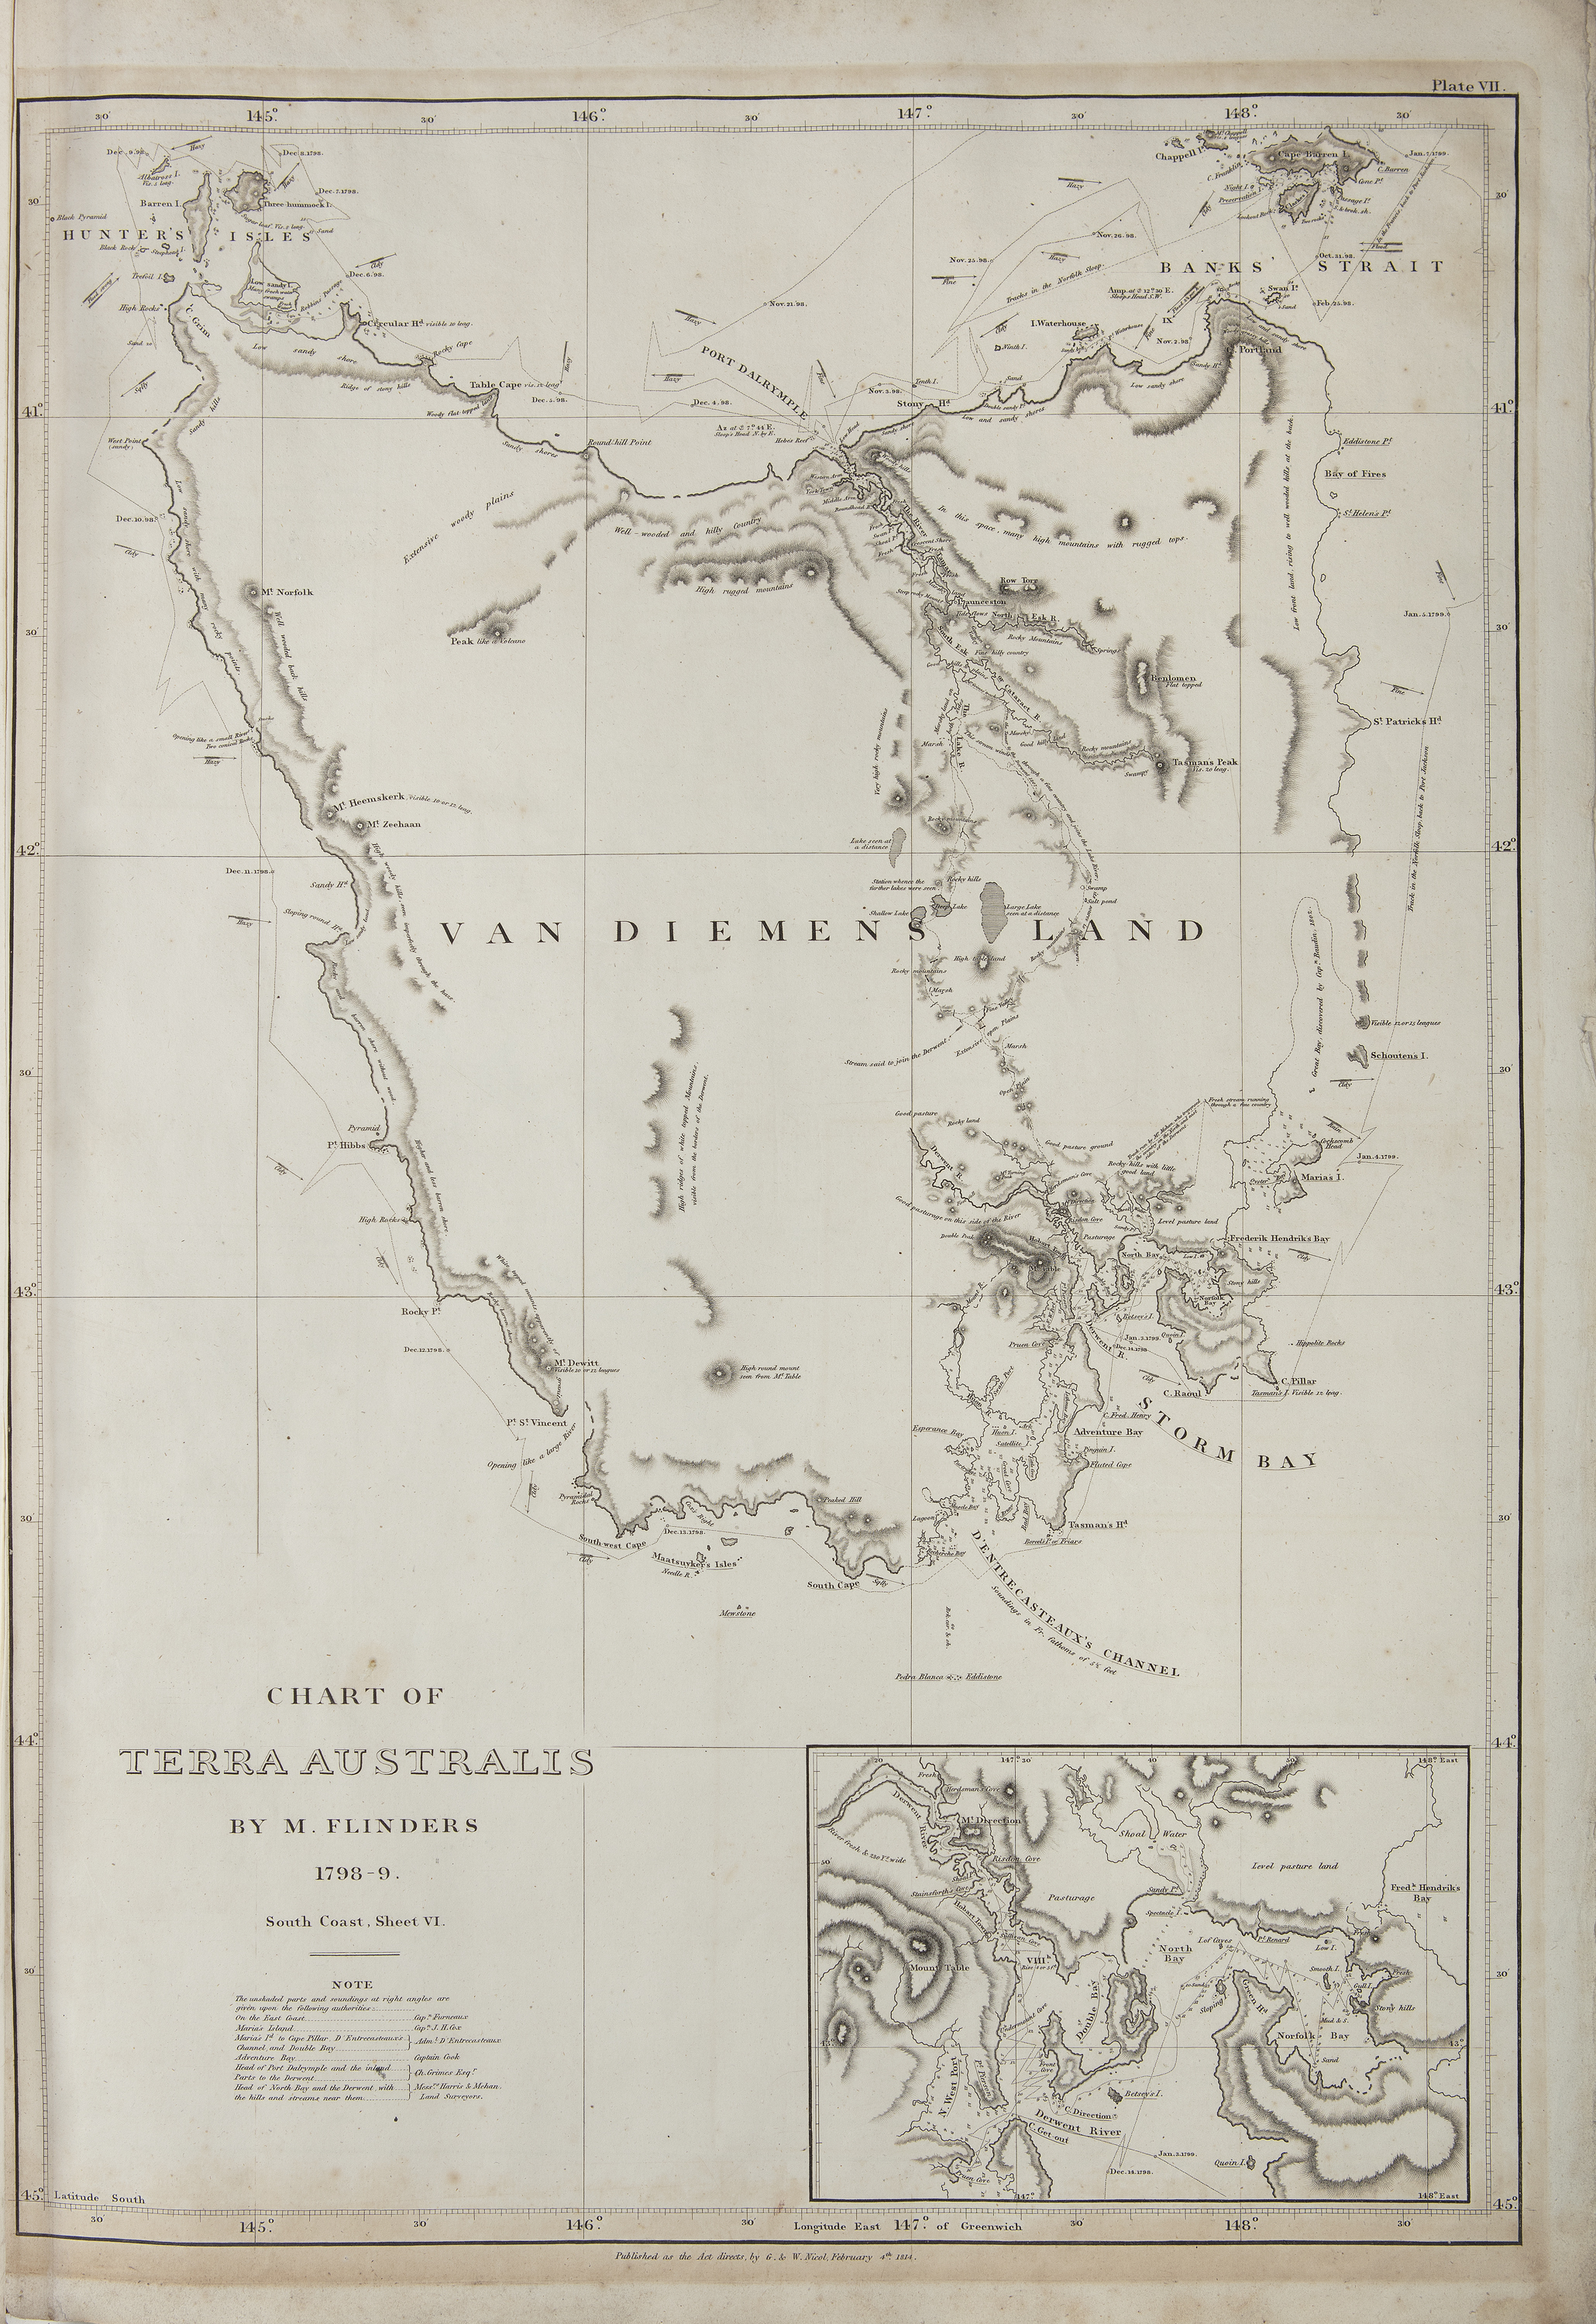 MATTHEW FLINDERS (BRITISH 1774 - 1814) A Voyage to Terra Australis, showing the parts explored - Image 18 of 19